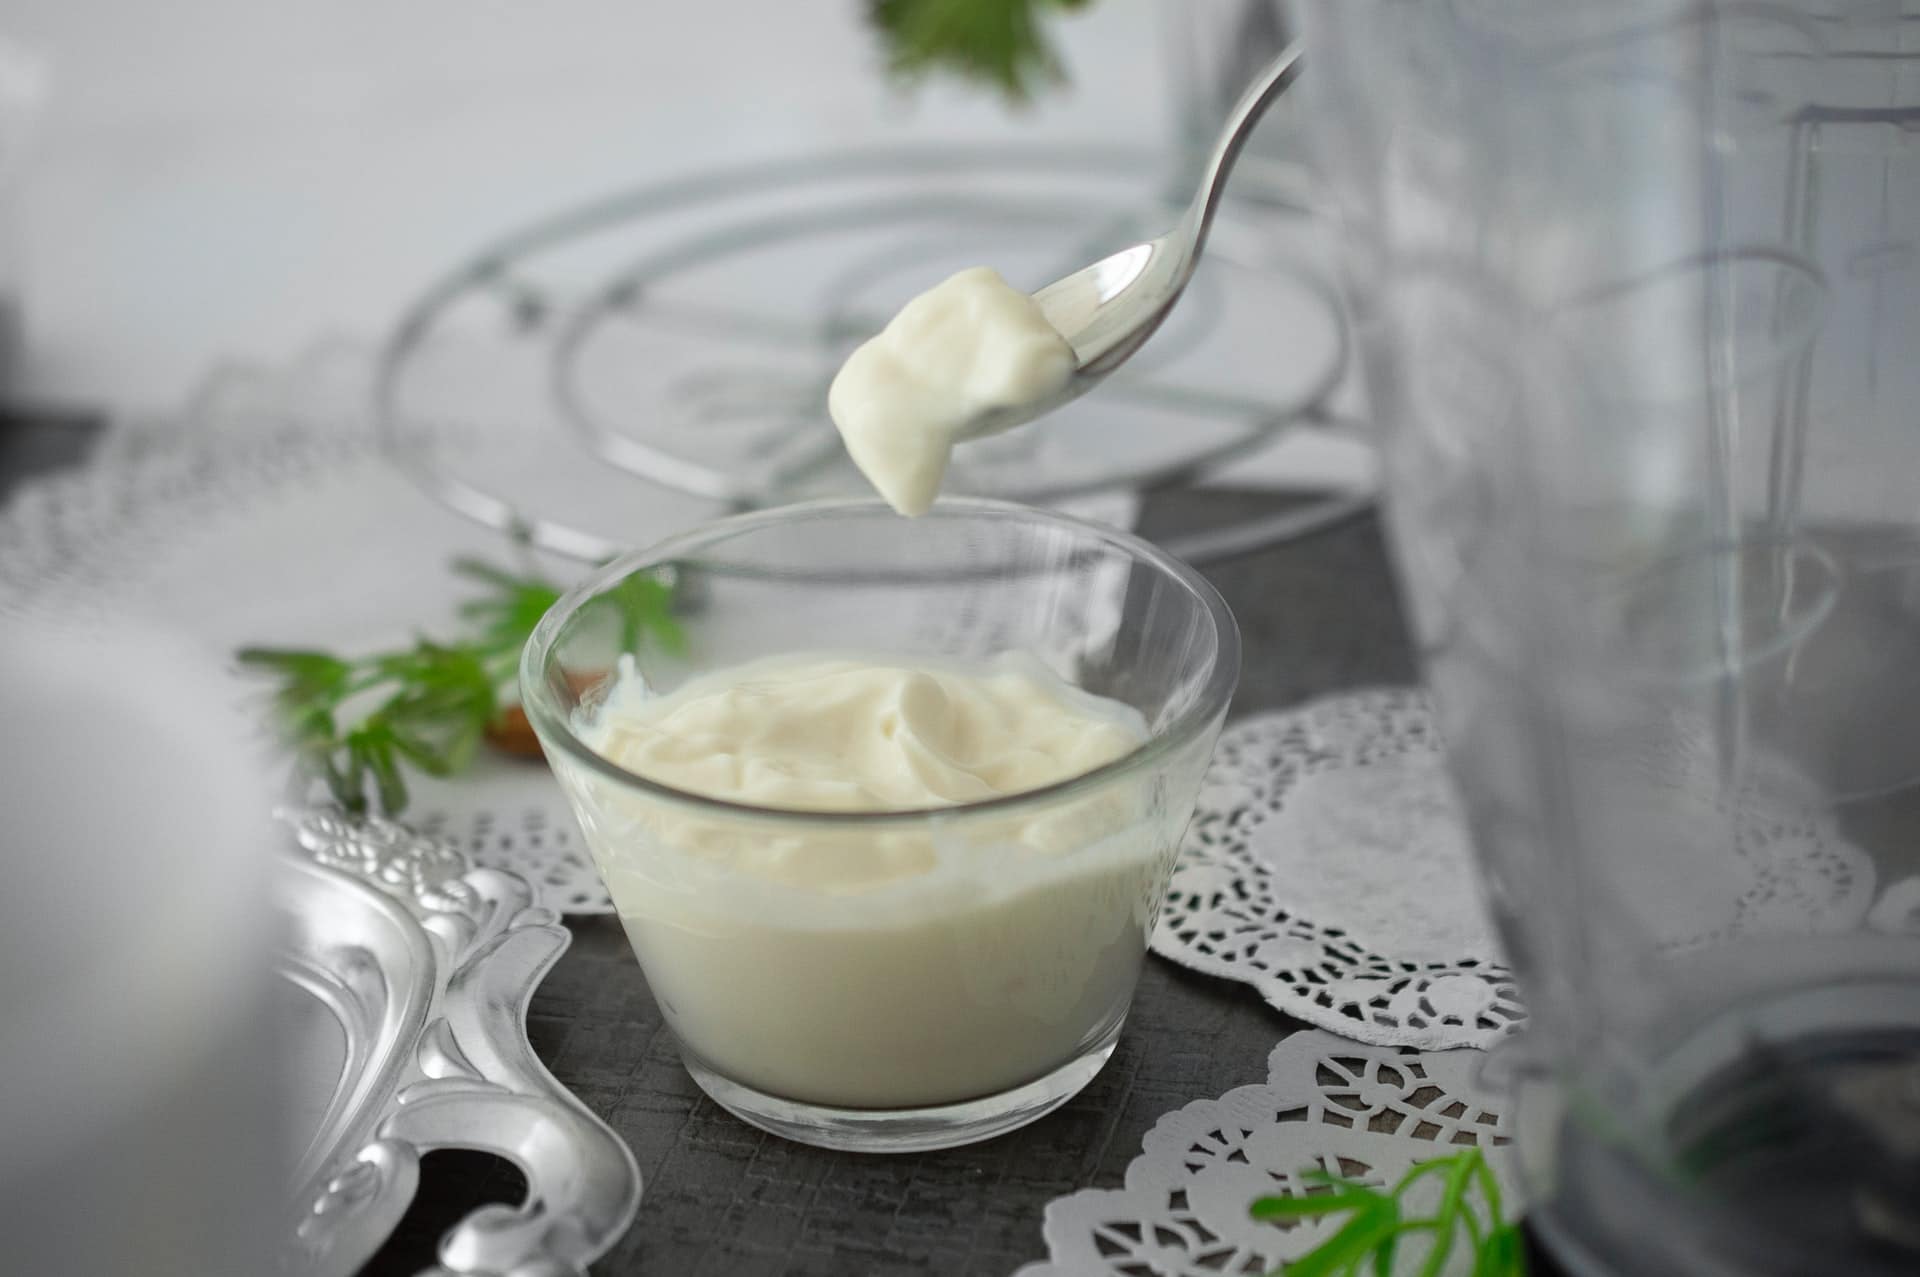 mayonnaise in a transparent glass bowl